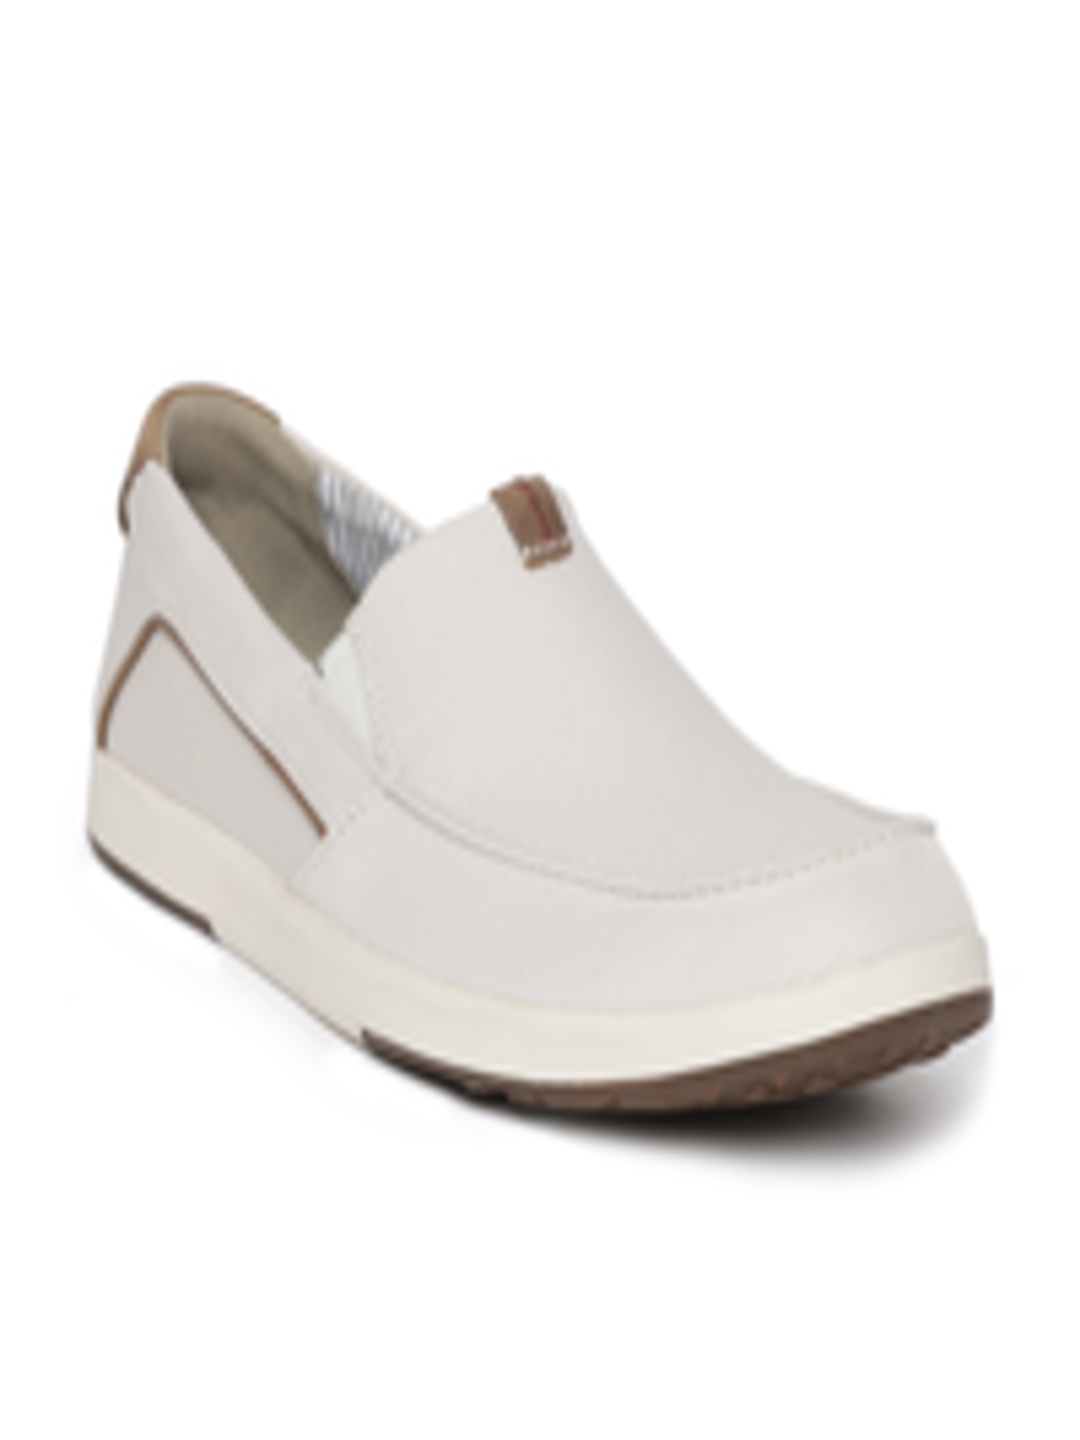 Buy Clarks Men Off White Slip On Sneakers Casual Shoes